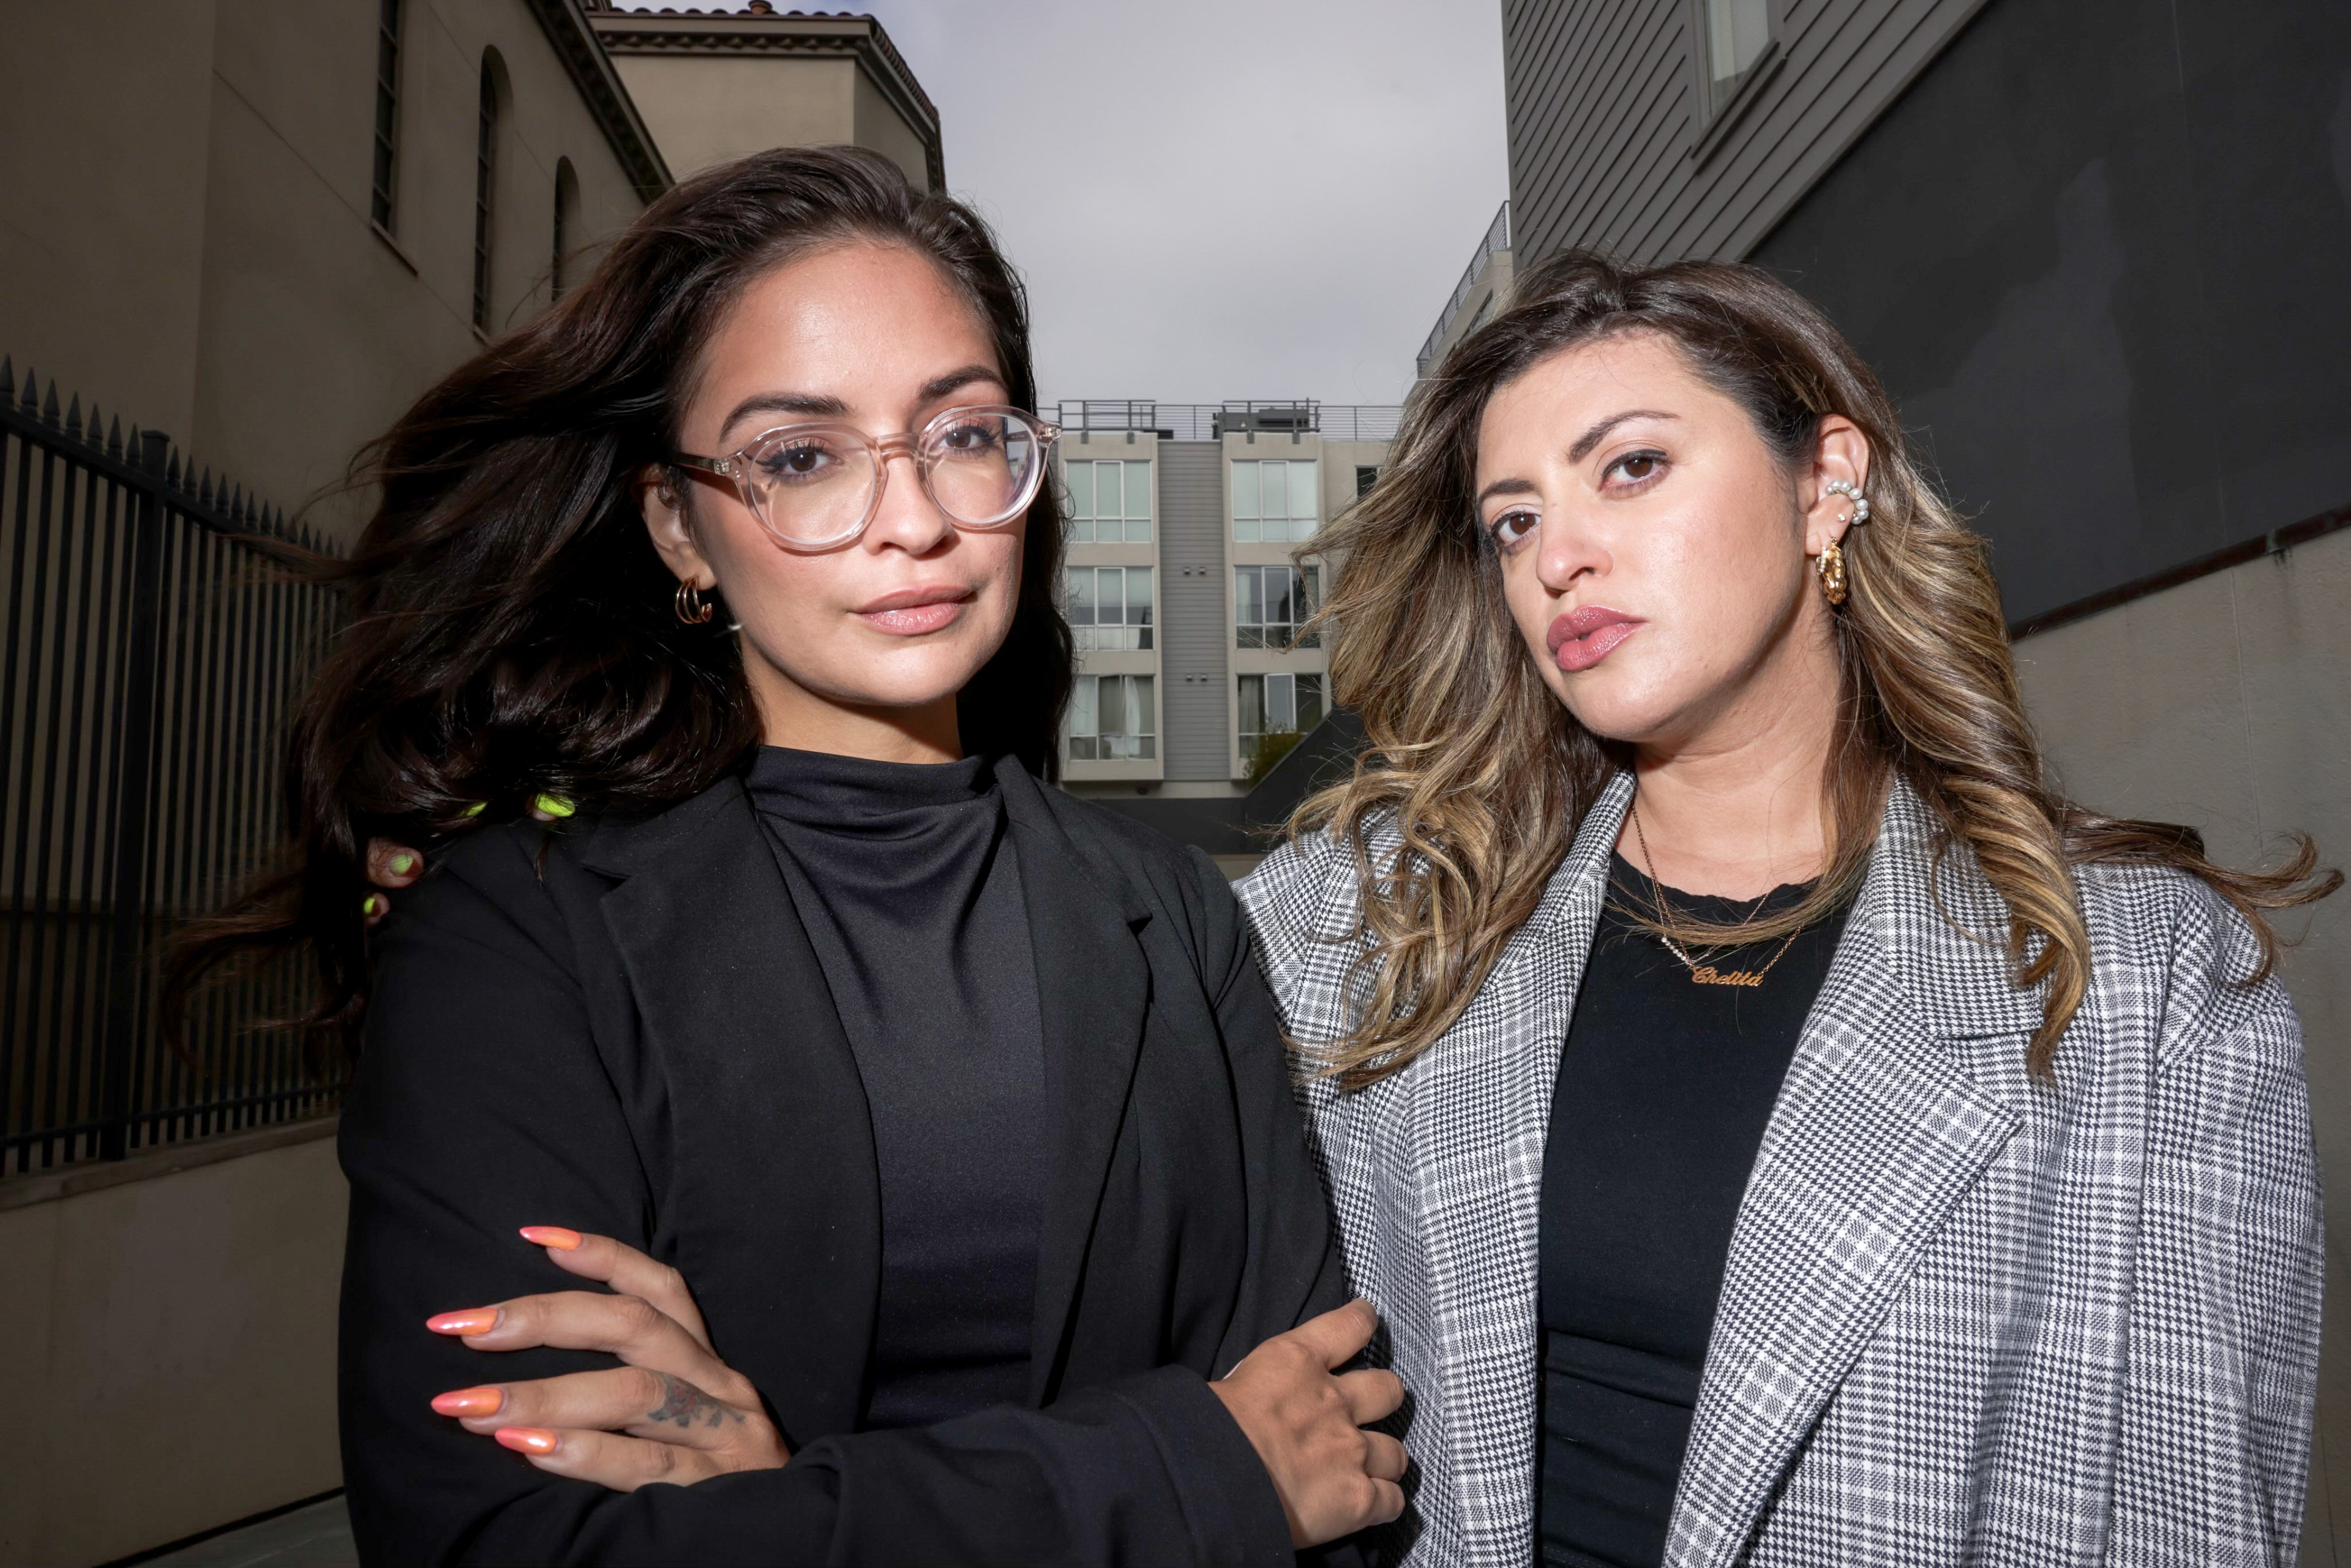 Two women stand side by side in an urban alleyway. One wears glasses and a black outfit; the other has long hair and wears a plaid blazer. Both look confidently at the camera.